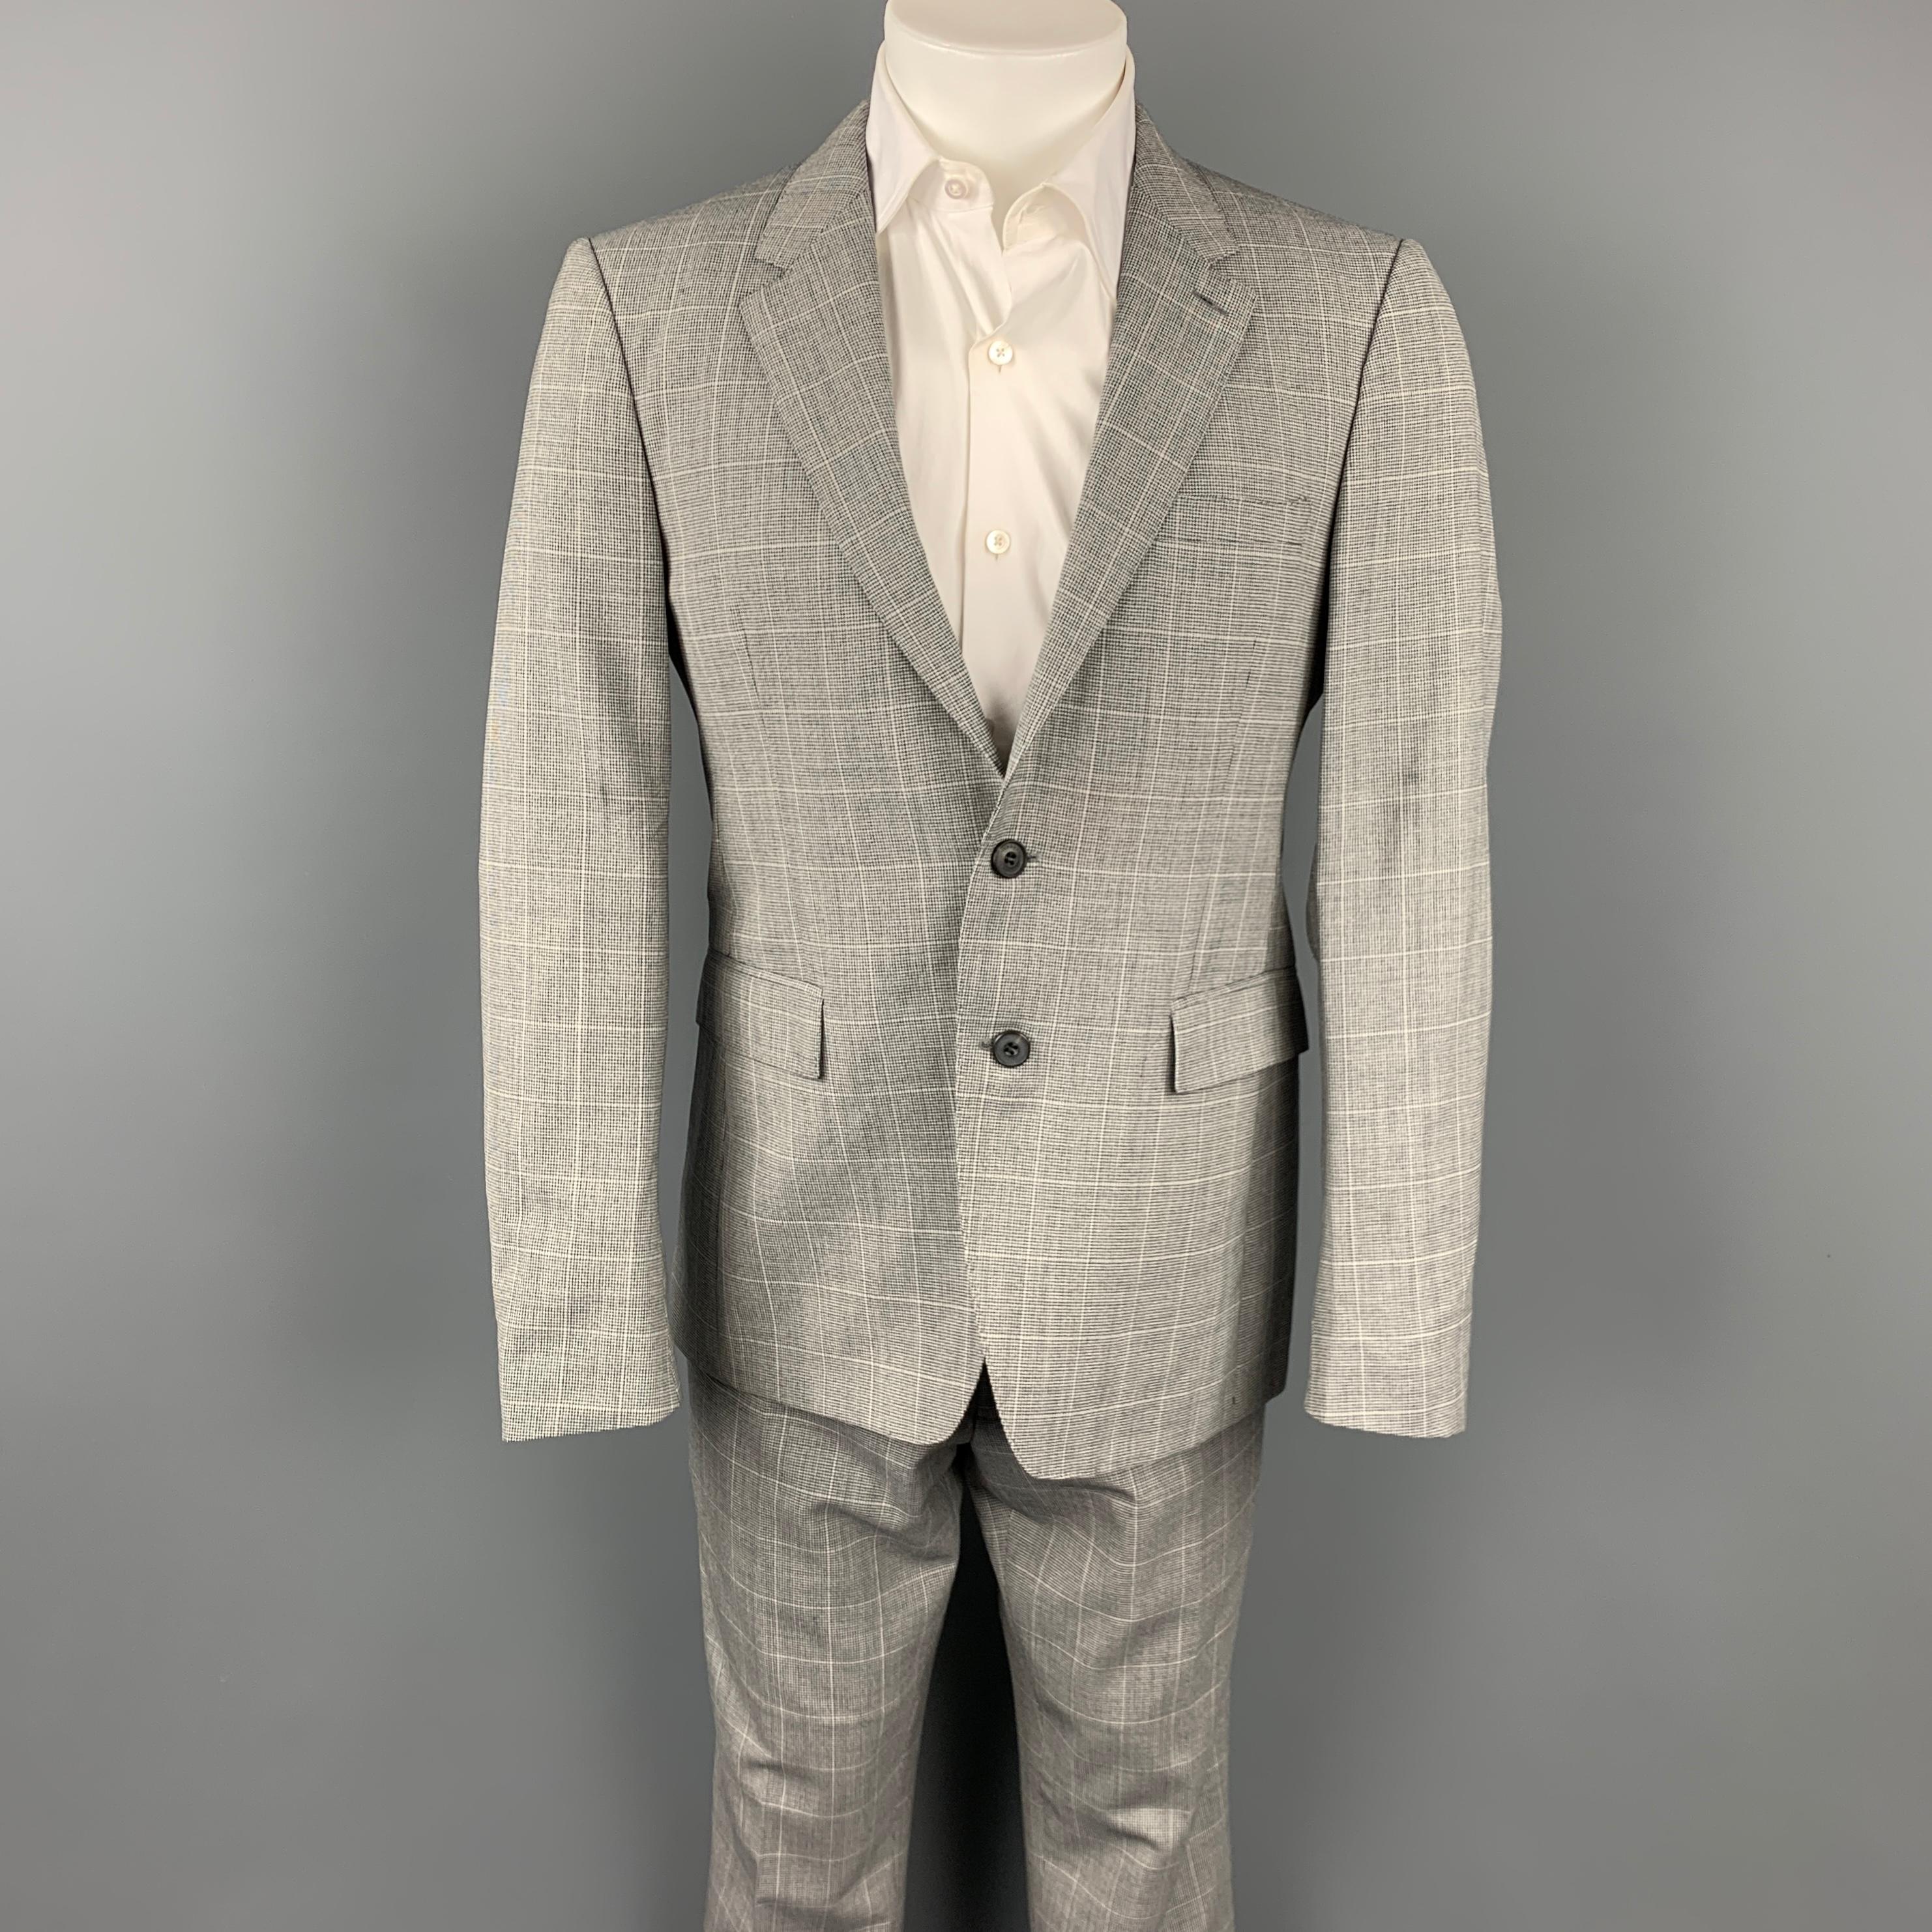 BURBERRY LONDON suit comes in a grey glenplaid virgin wool with a full liner and includes a single breasted,  two button sport coat with a notch lapel and matching flat front trousers. Made in Italy.

Very Good Pre-Owned Condition.
Marked: 48